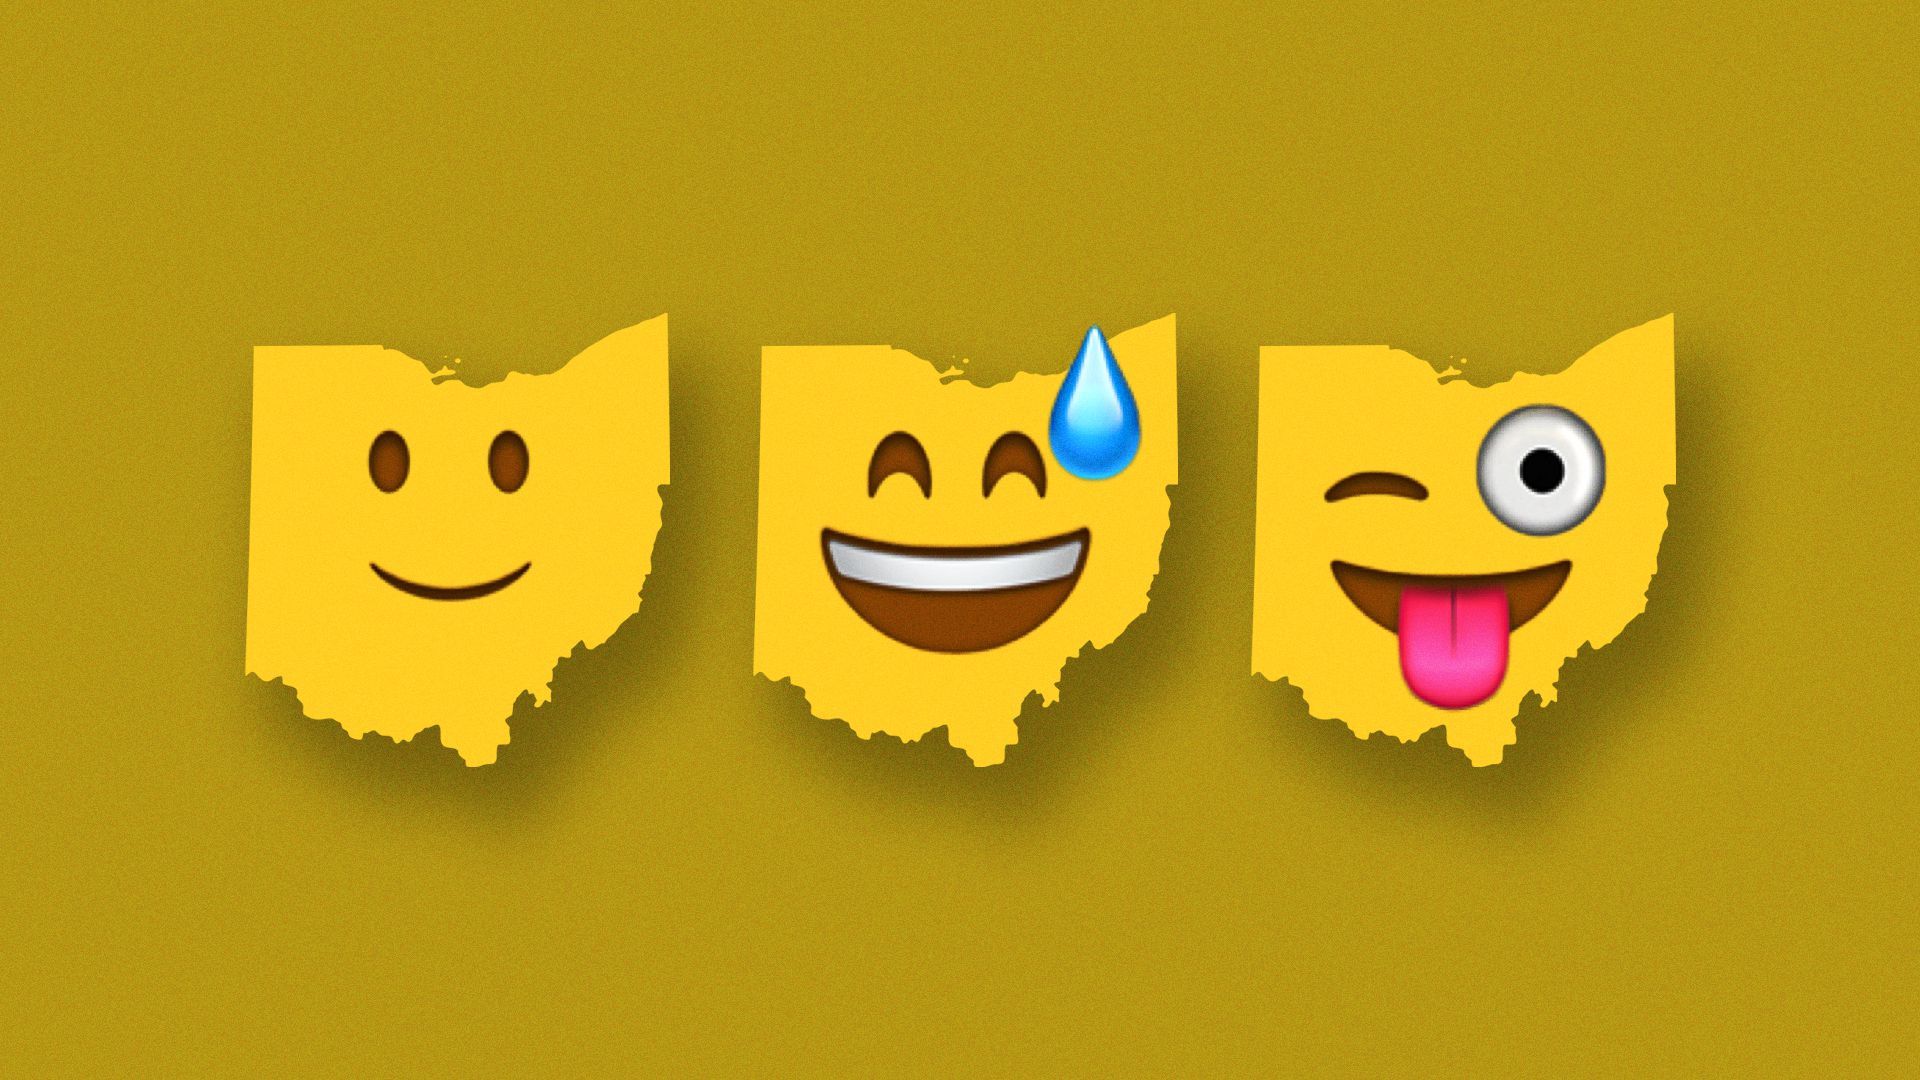 Illustration of three smiling emojis, each on an outline of Ohio.